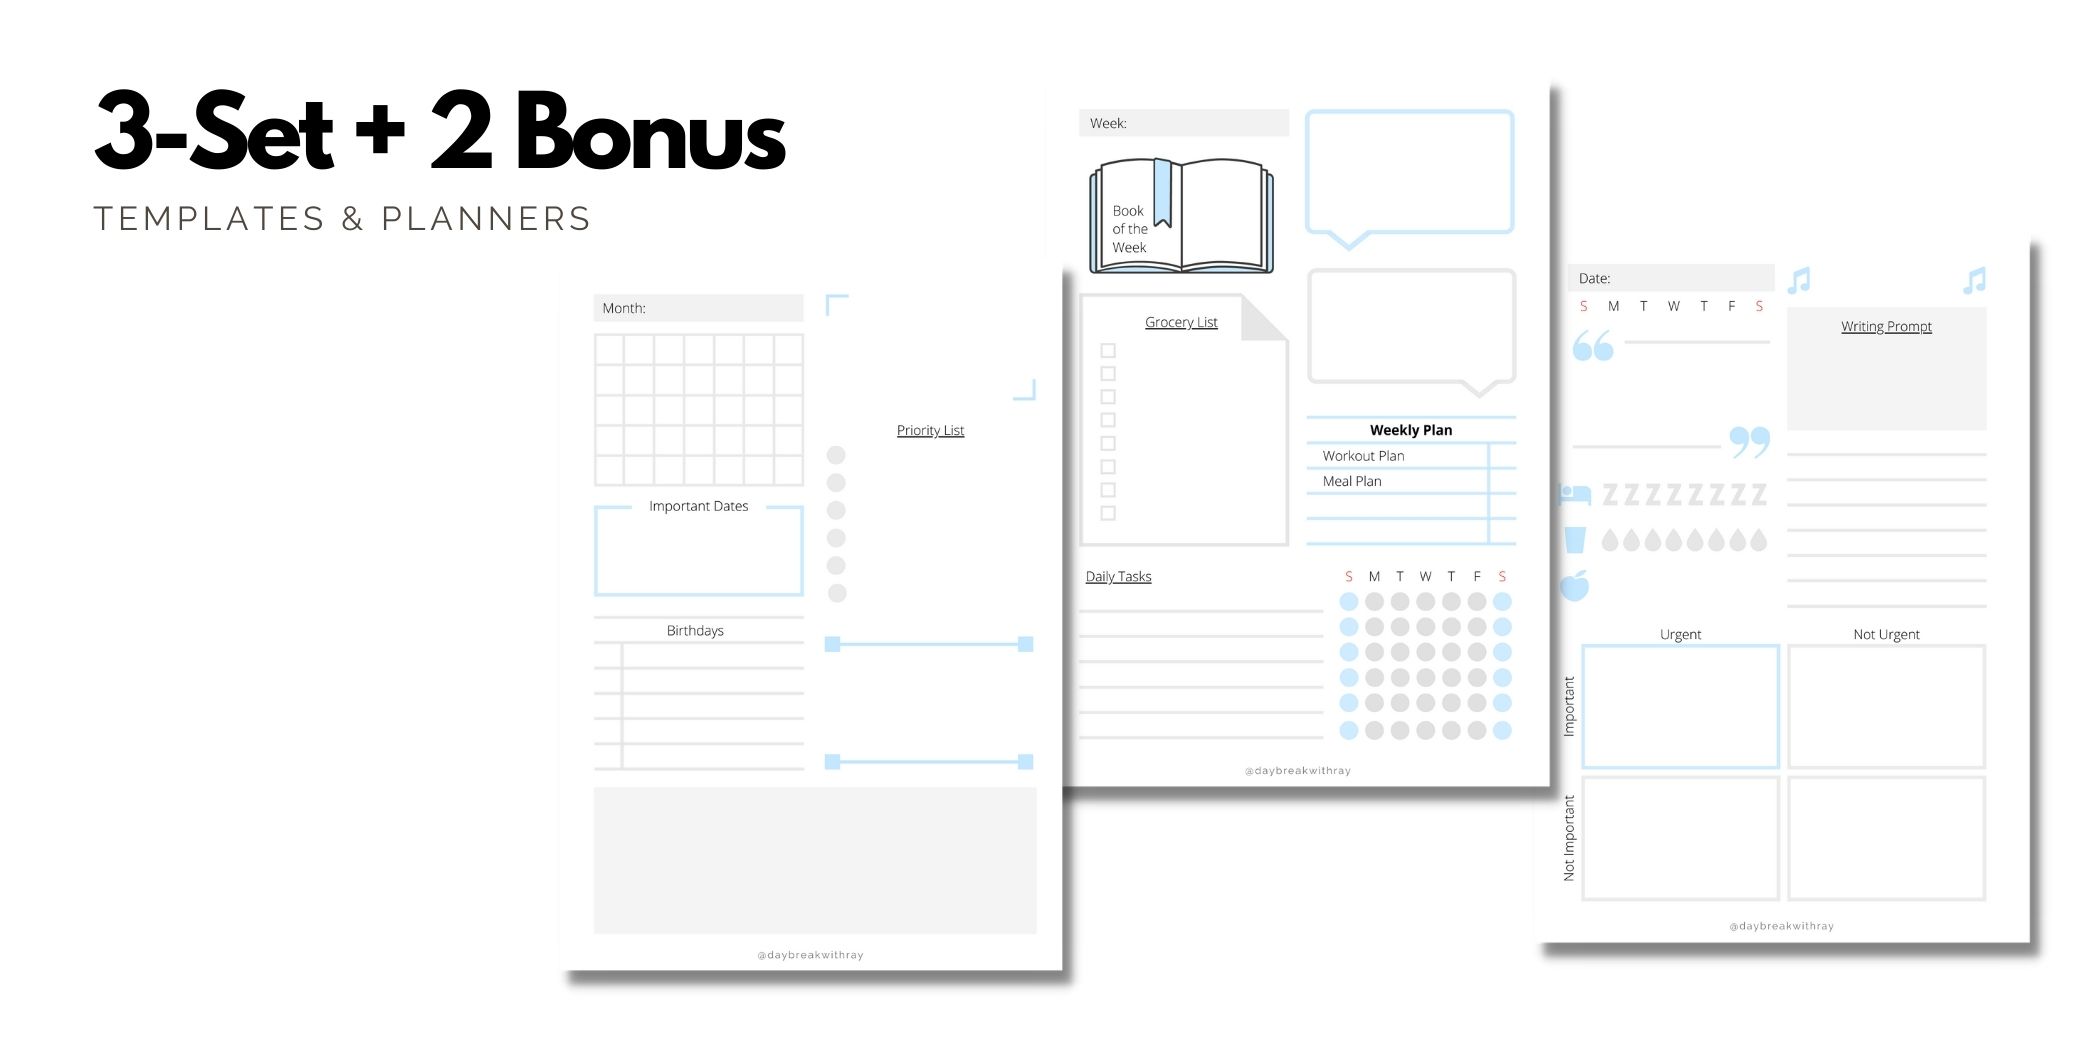 (Featured Image) 3+2 Template and Planners